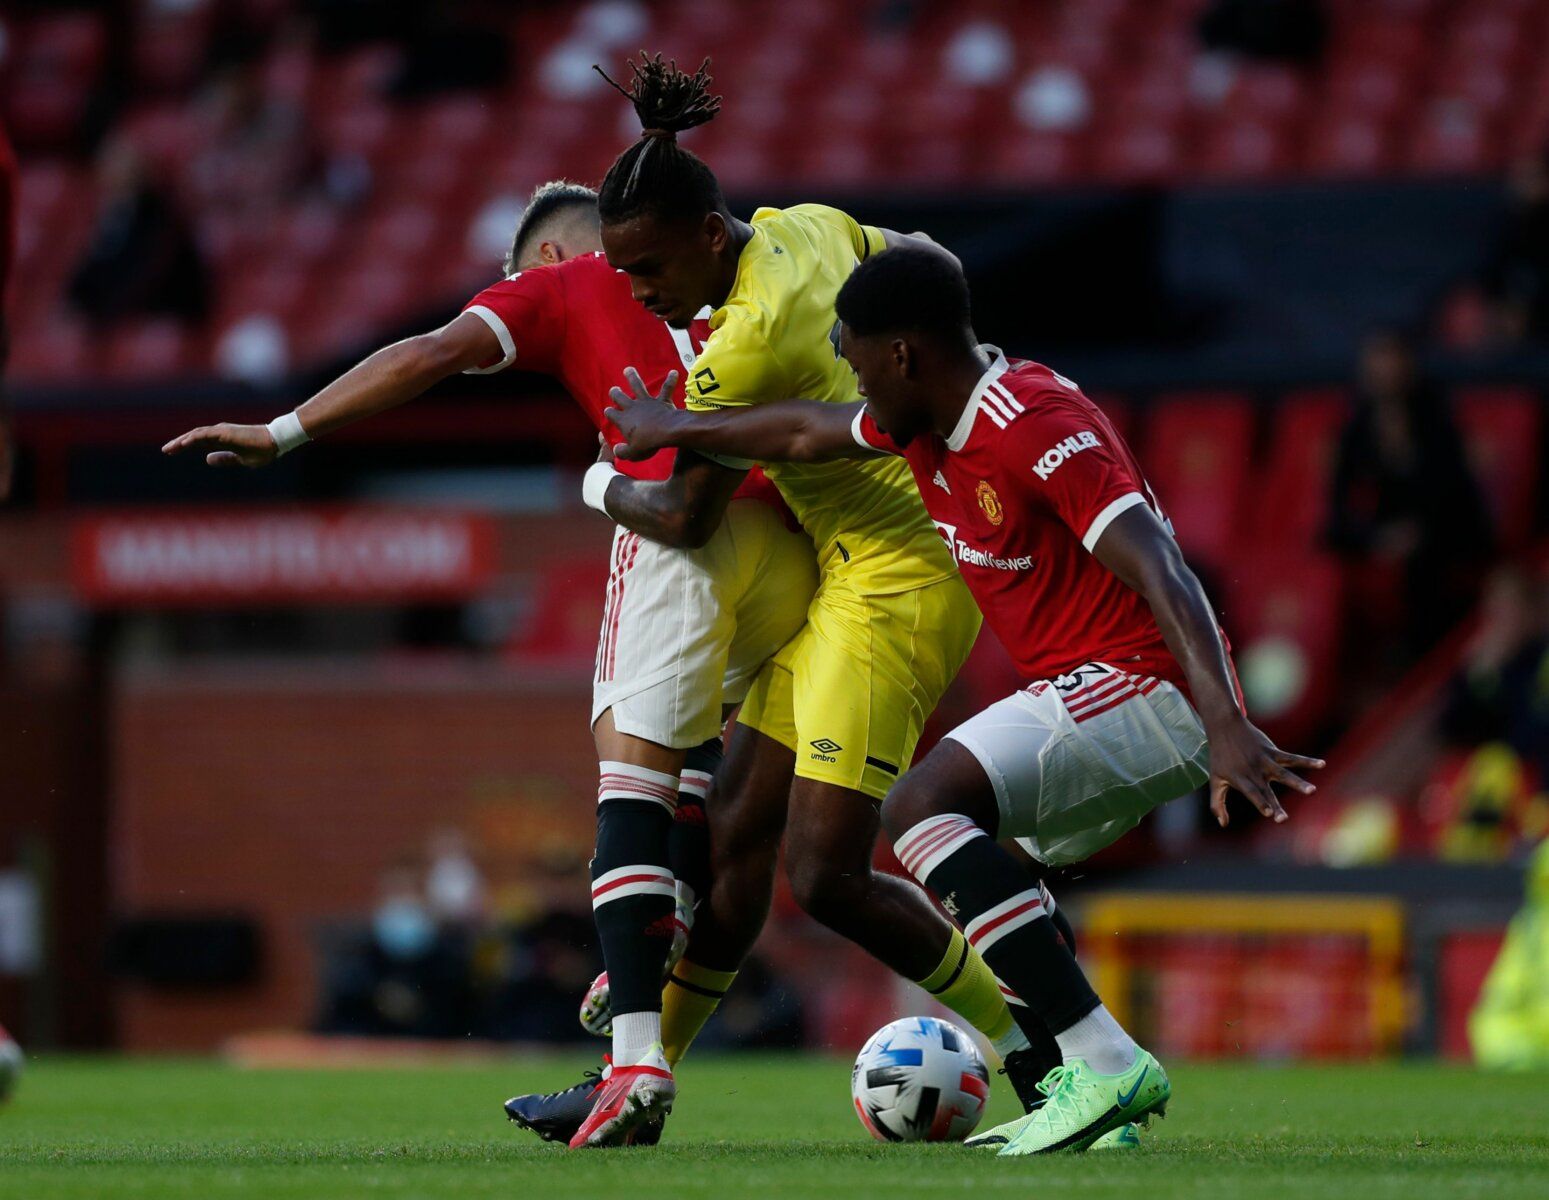 Soccer Football - Pre Season Friendly - Manchester United v Brentford - Old Trafford, Manchester, Britain - July 28, 2021  Brentford's Ivan Toney in action with Manchester United's Andreas Pereira and Teden Mengi Action Images via Reuters/Lee Smith